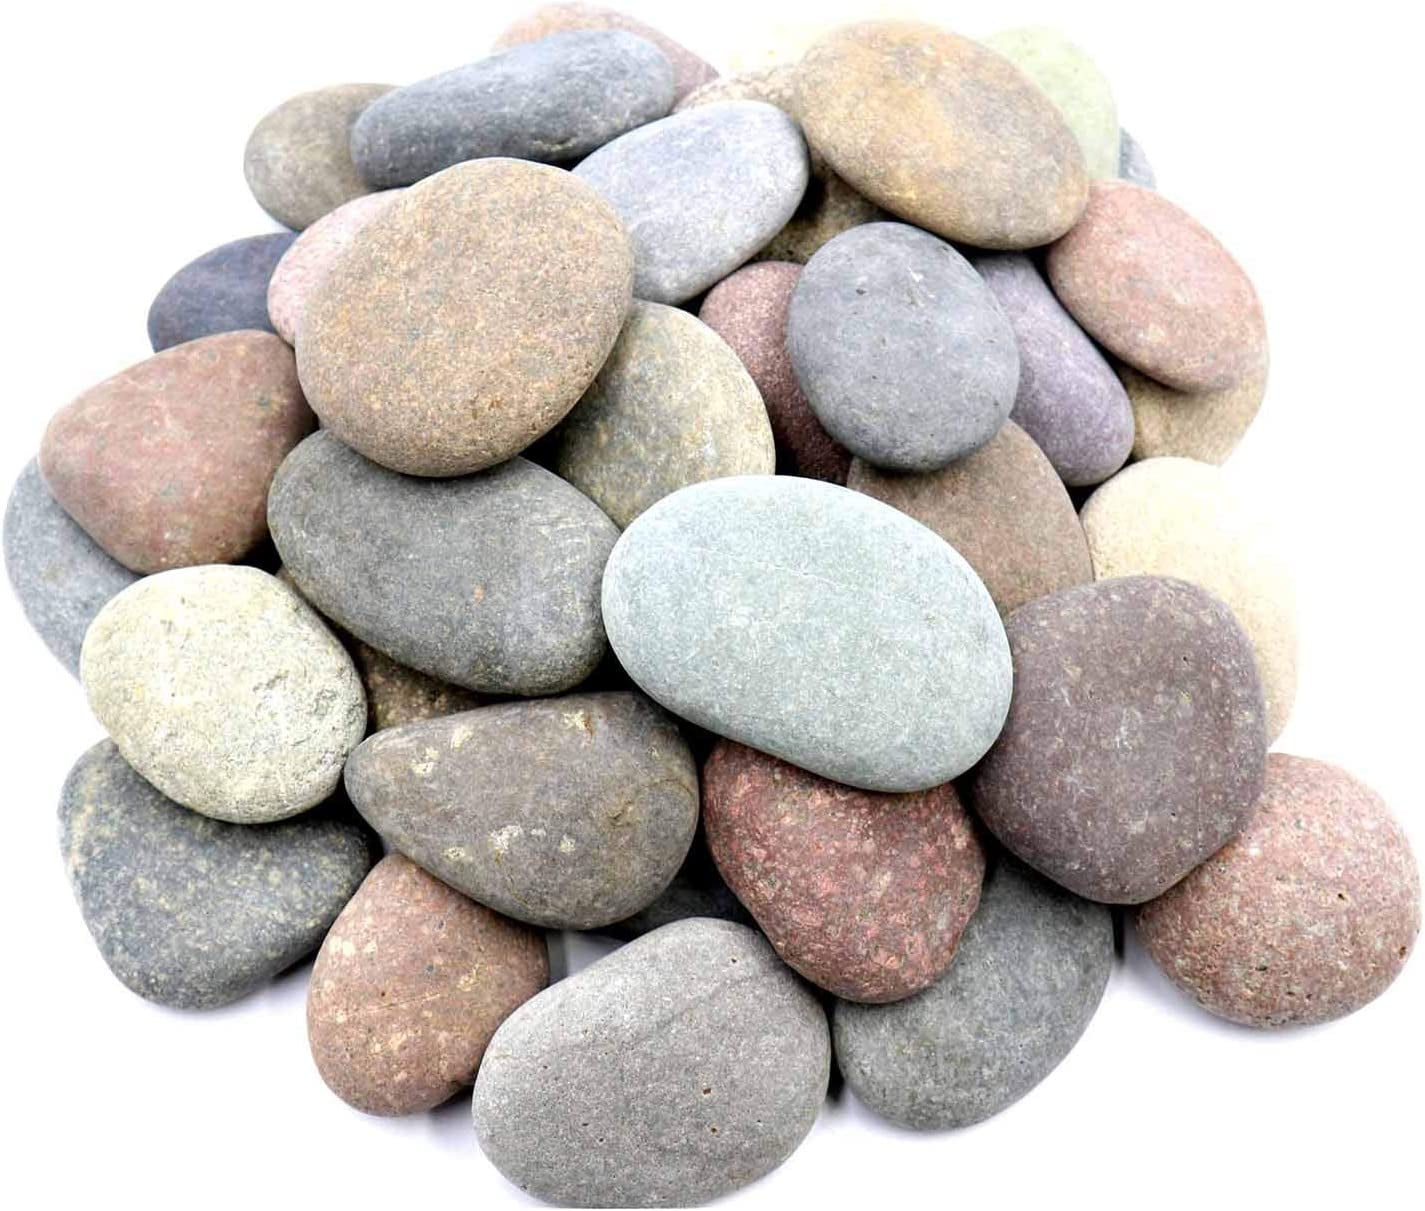 Koltose by Mash Ultra Large River Rocks for Painting – 20 Extra Big Rocks, 3.5” - 5” inch Flat Smooth Stones, 12-14 lb. of Craft Rocks for Rock